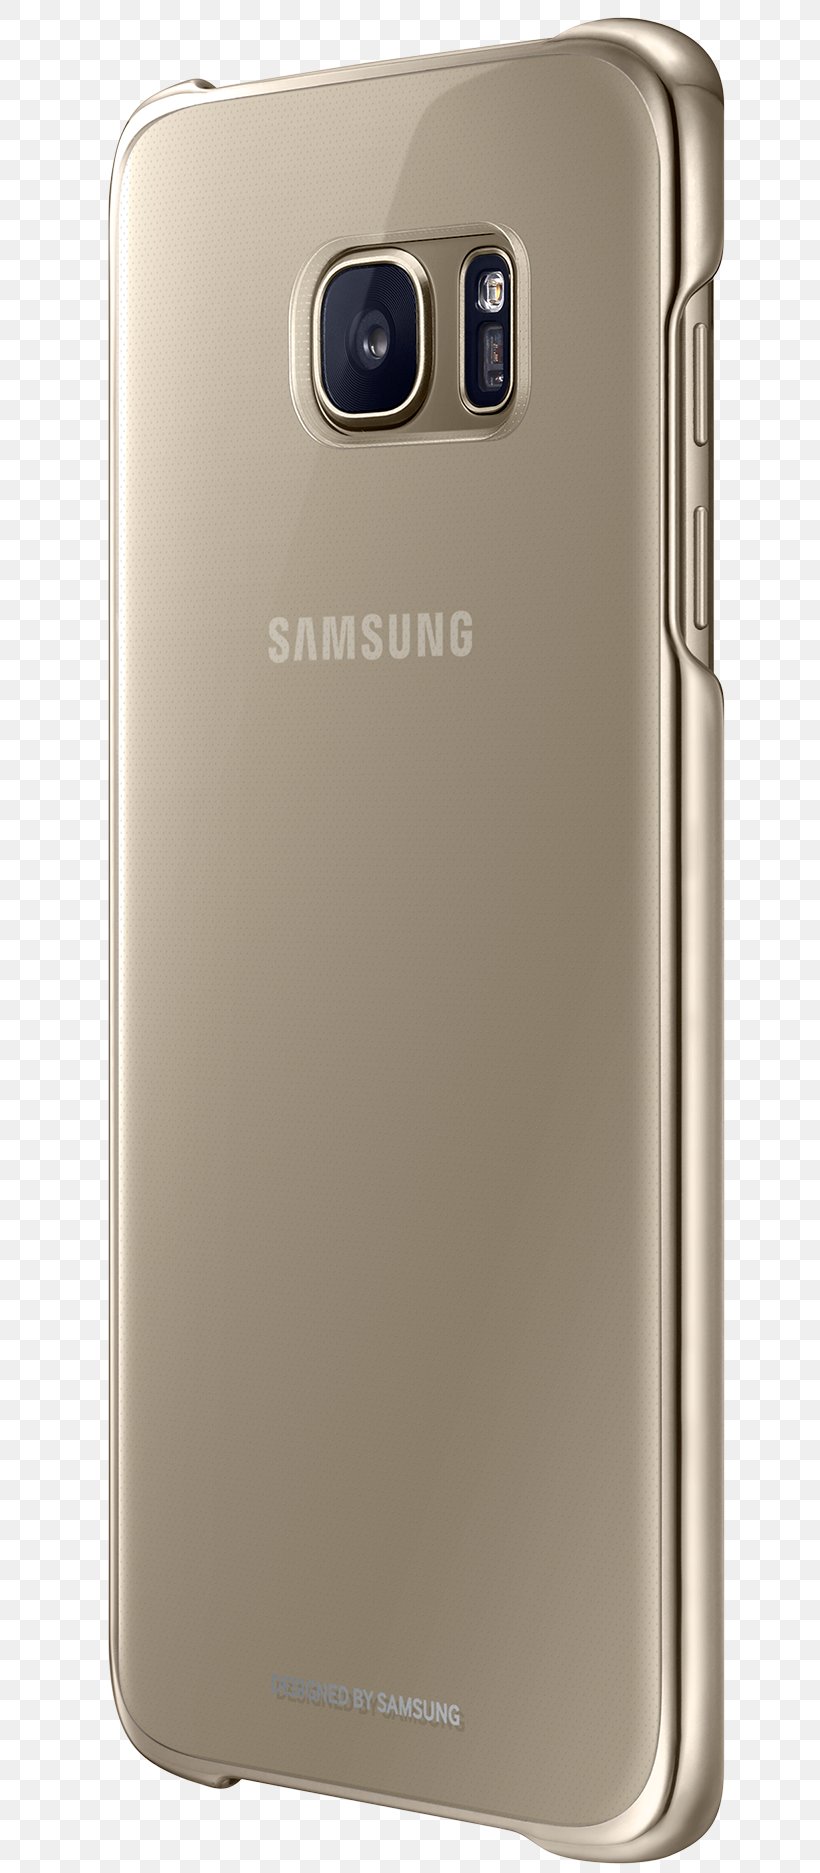 Samsung GALAXY S7 Edge Smartphone Feature Phone Samsung Galaxy Note 4, PNG, 673x1873px, Samsung Galaxy S7 Edge, Cellular Network, Communication Device, Electronic Device, Feature Phone Download Free